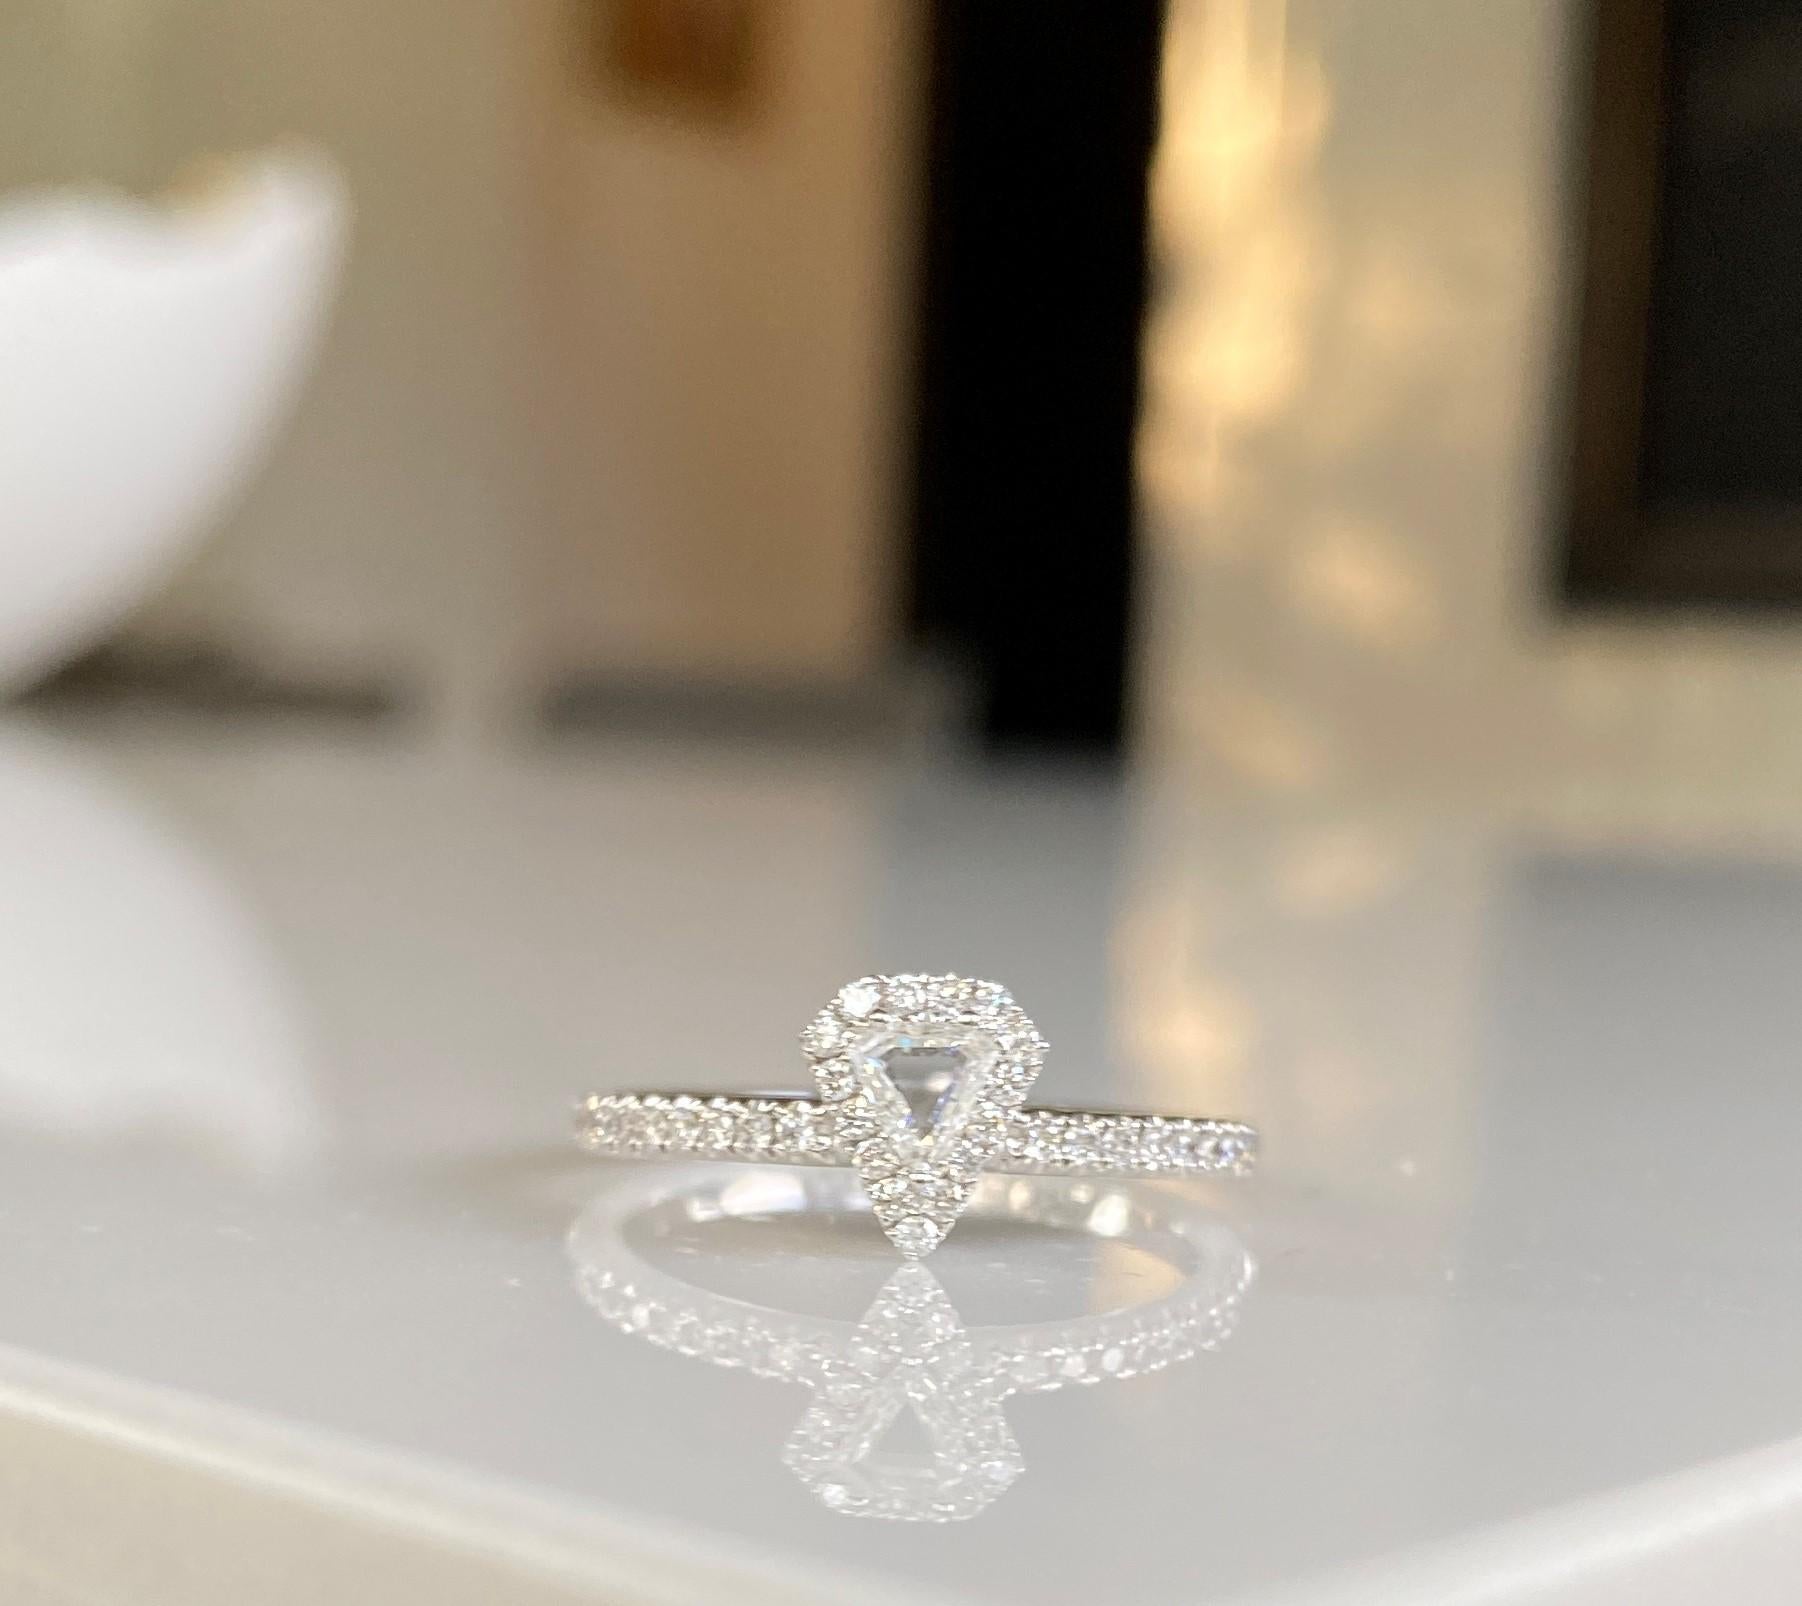 Make a statement with this modern Trillion diamond solitaire and pave diamond ring. Dress up or down, wear it as a fun stacking ring or alternative bridal band or engagement ring.  Total diamond weight - 0.37 ctw set in 18k white gold.